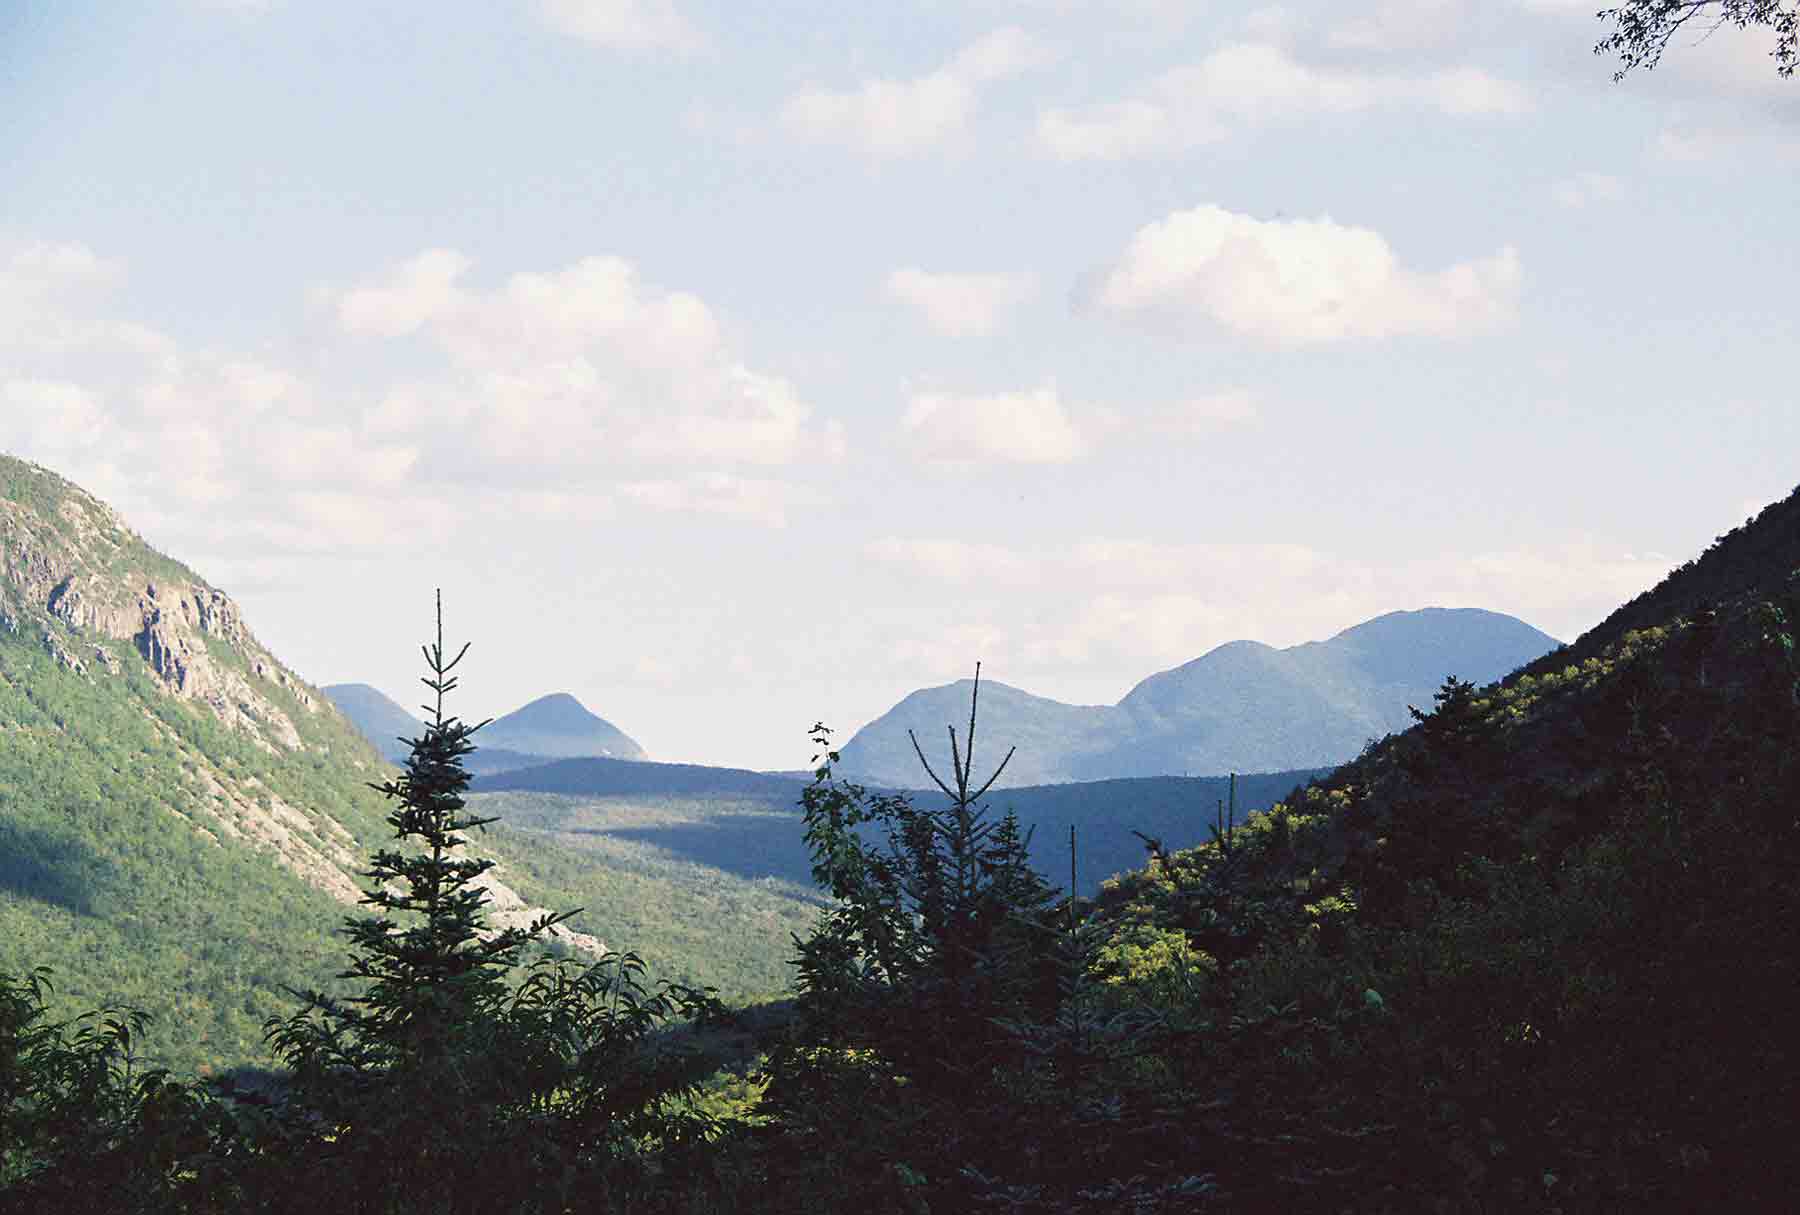 View south down Zealand Notch from hut.  Courtesy dlcul@conncoll.edu